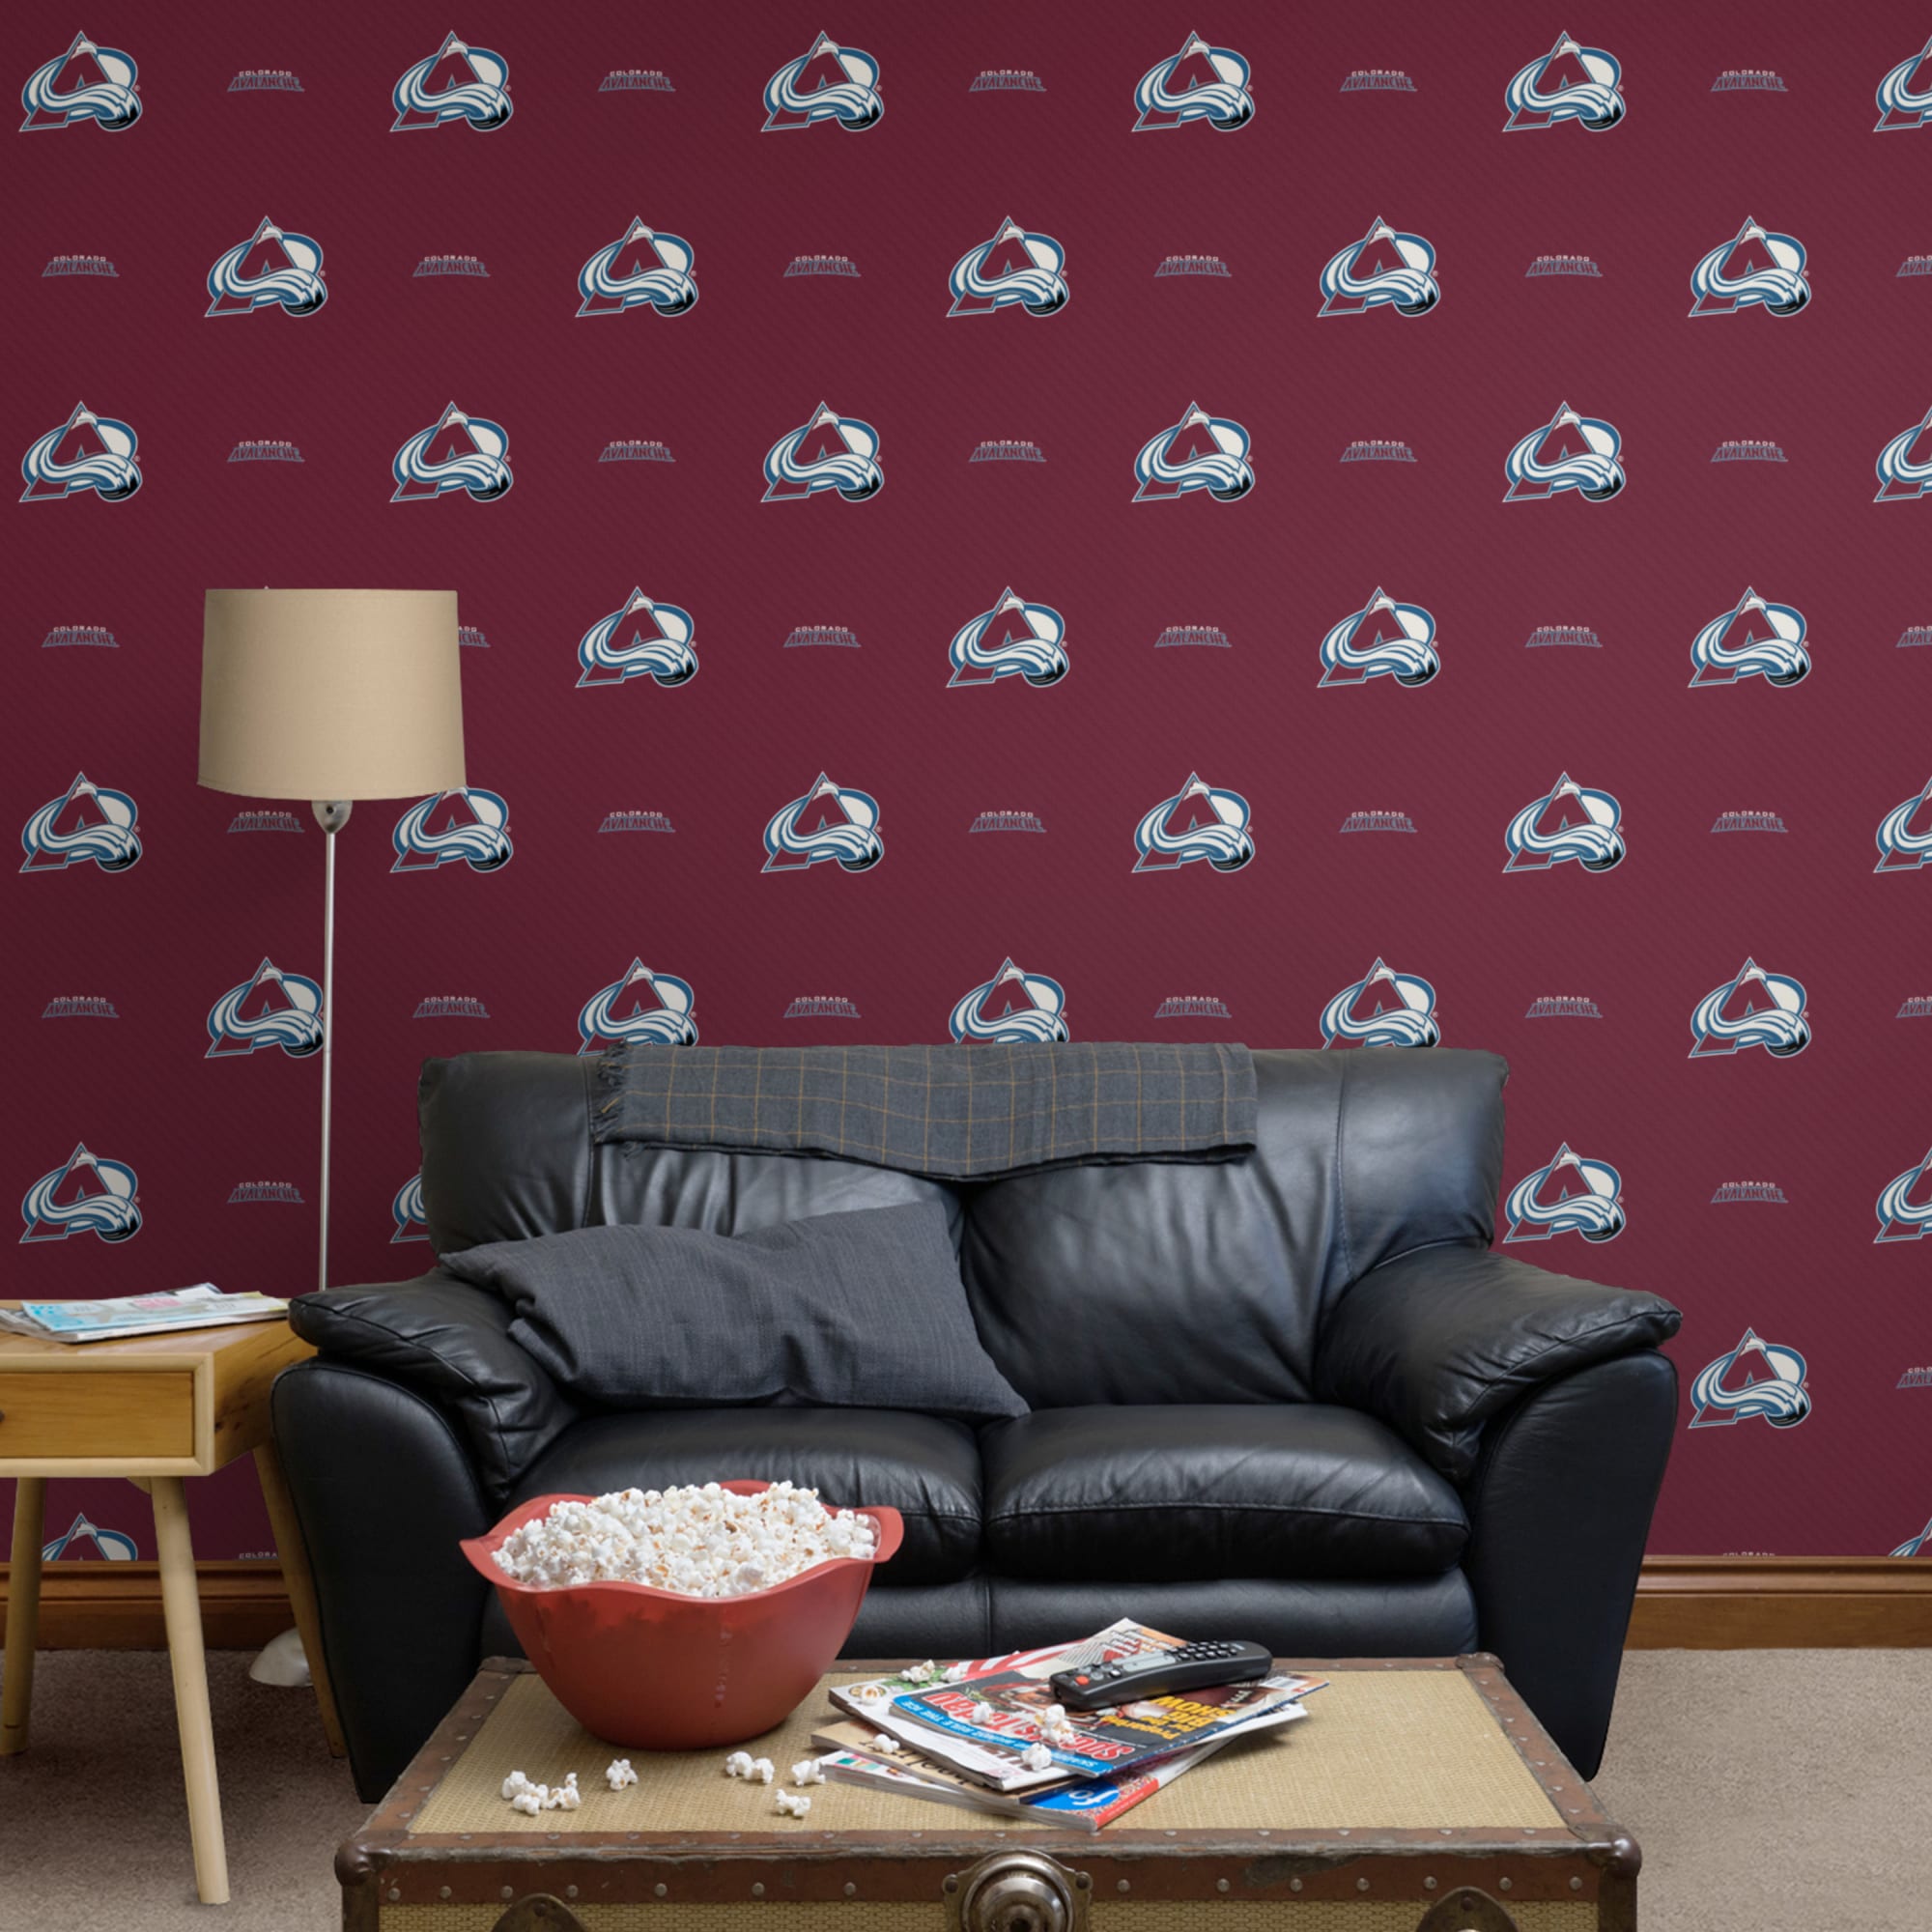 Colorado Avalanche: Stripes Pattern - Officially Licensed NHL Removable Wallpaper 12" x 12" Sample by Fathead